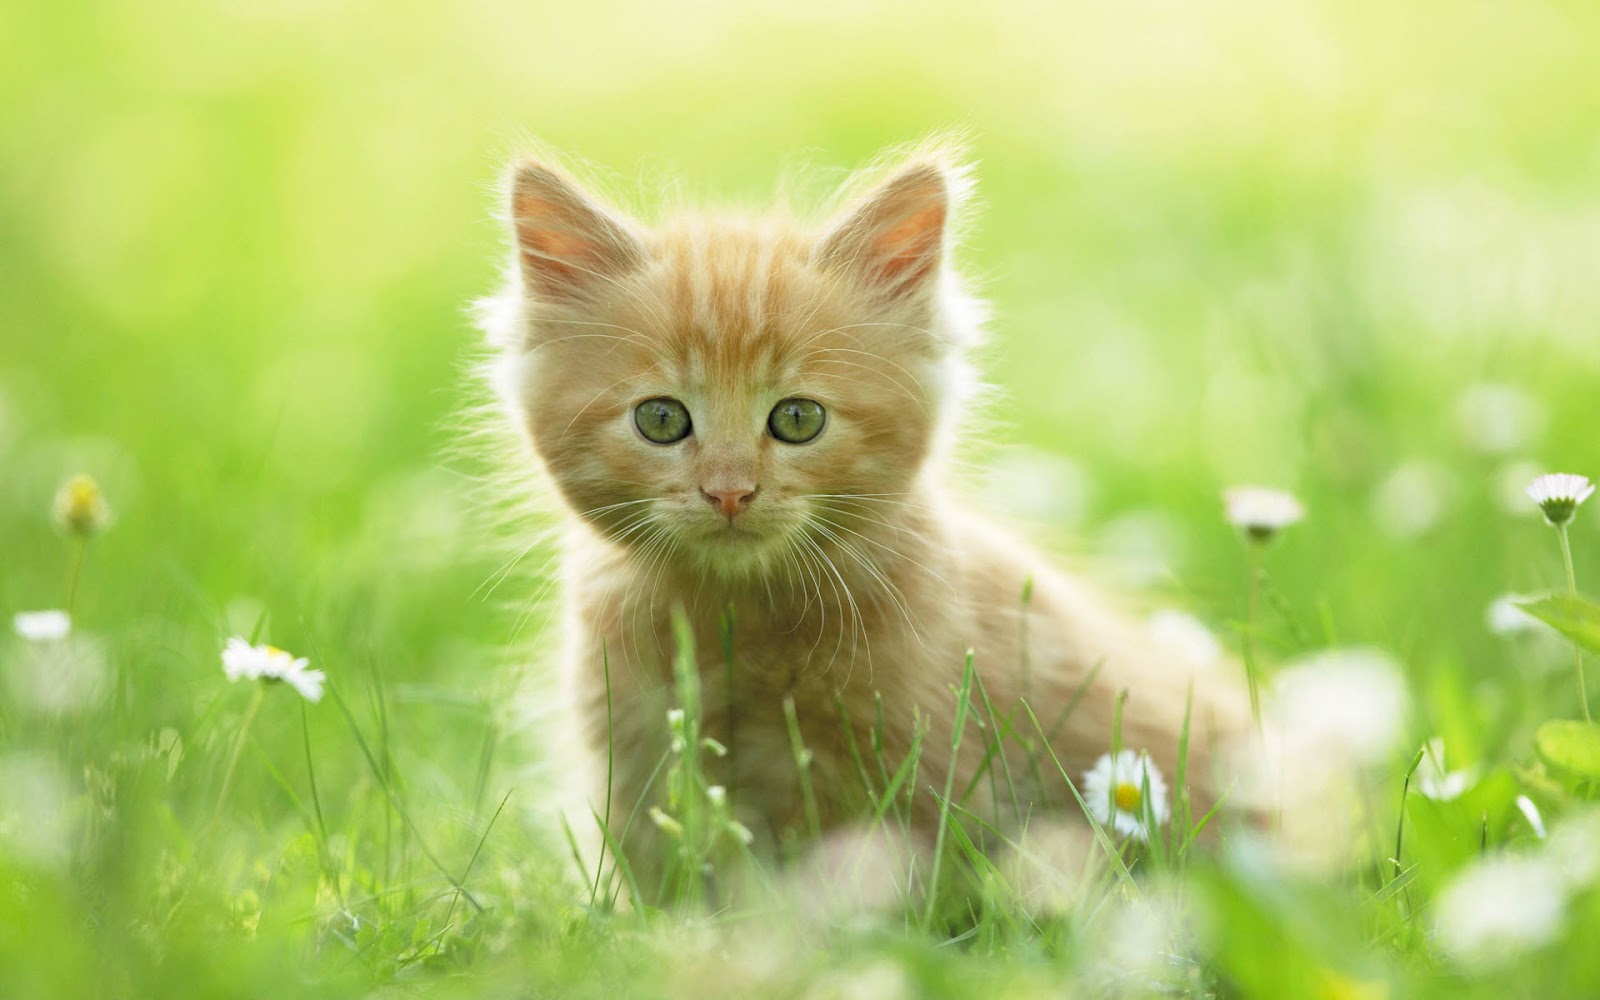 Its HD Animals Funny Wallpapers cute puppies and kittens wallpaper